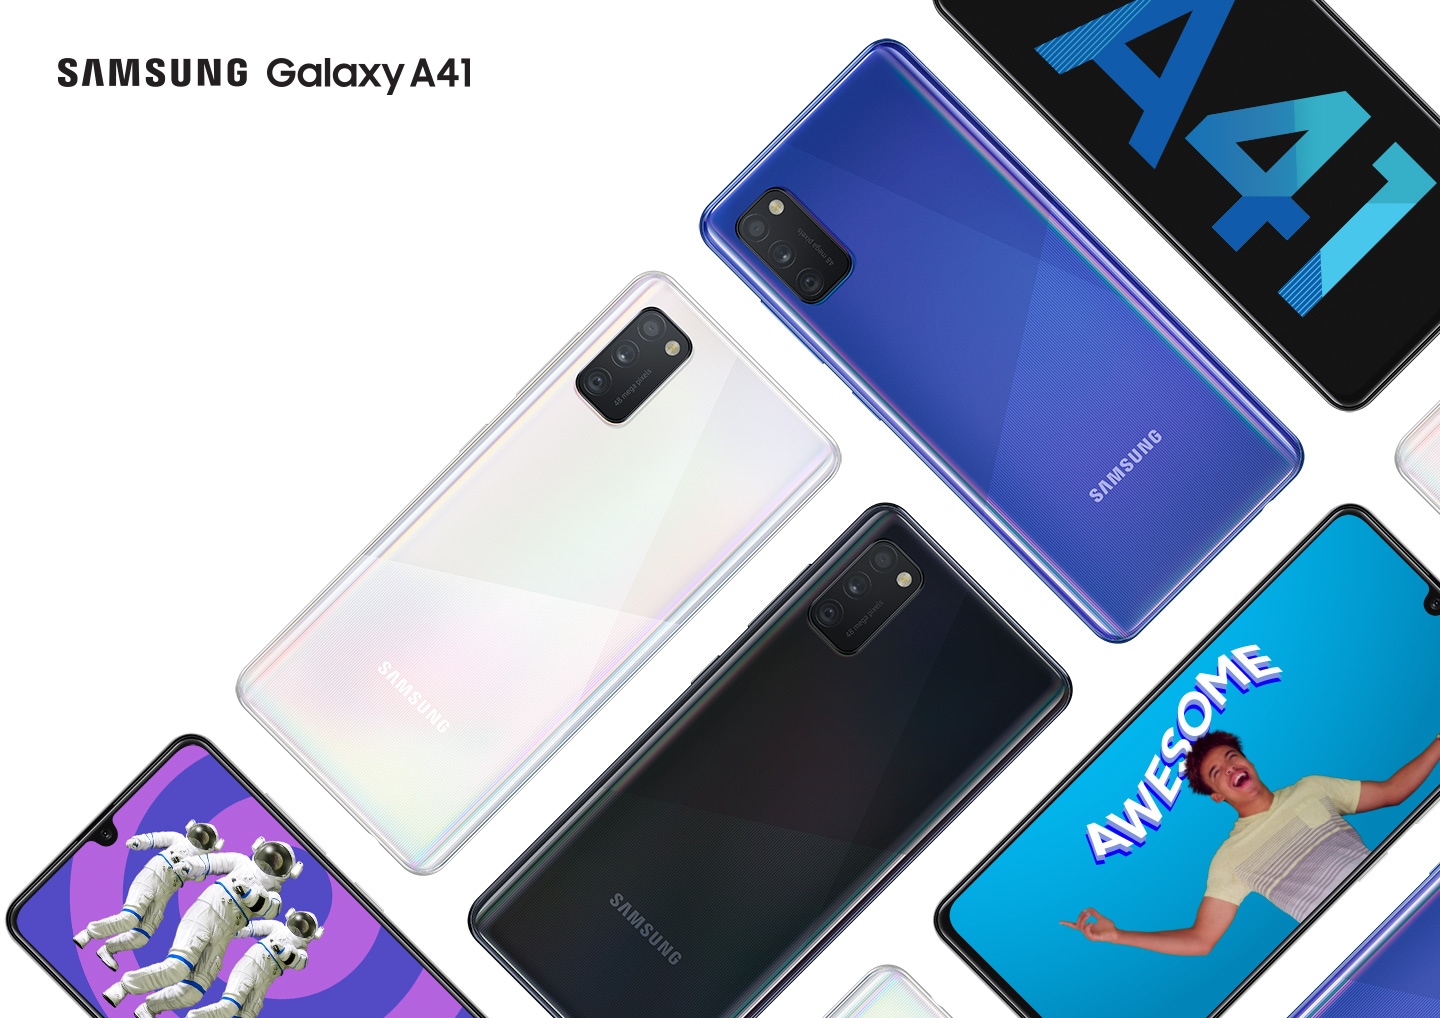 Galaxy A41. Made for your kind of awesome.